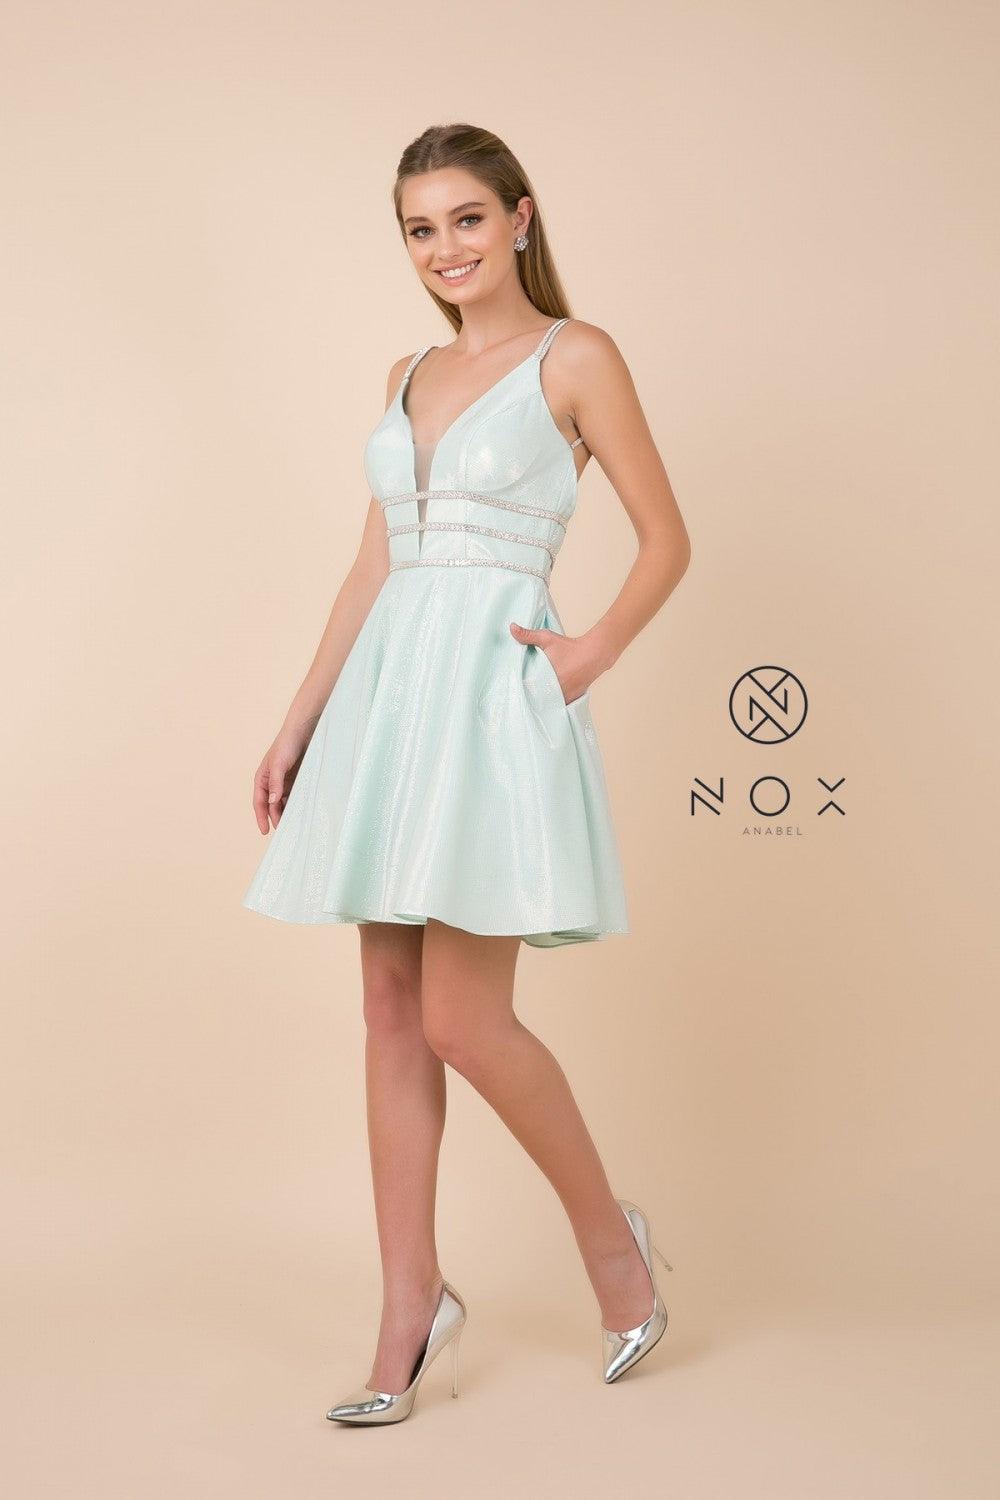 Short Prom Dress Sleeveless Cocktail - The Dress Outlet Nox Anabel